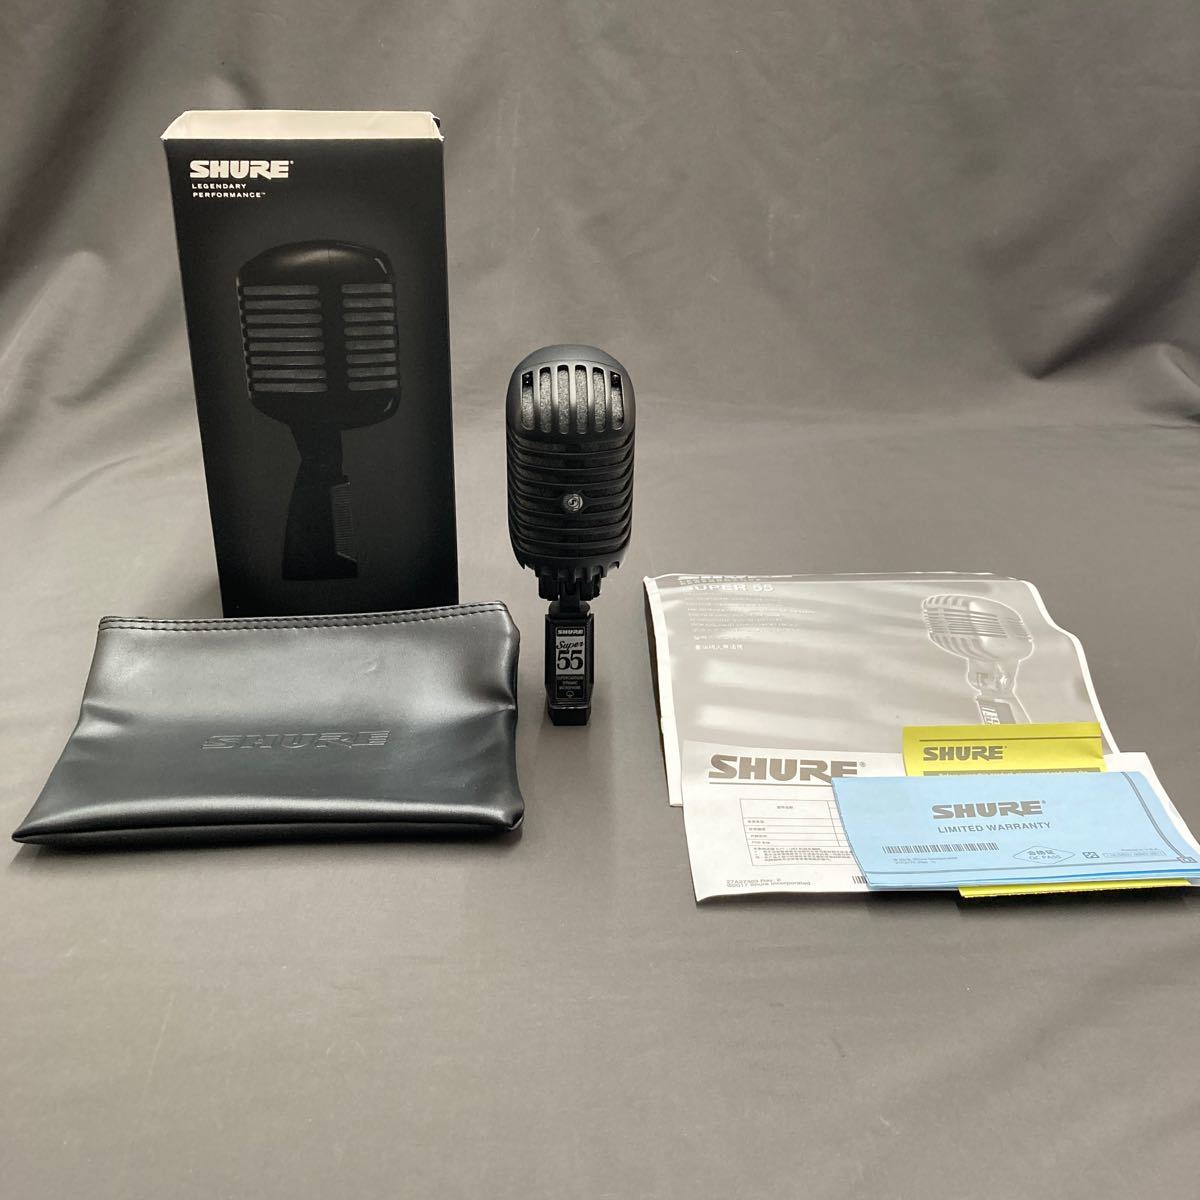 383◆SHURE SUPER 55-BLK LEGENDARY PERFORMANCE MICROPHONE LIMITED EDITION 限定品！ガイコツマイク_画像1